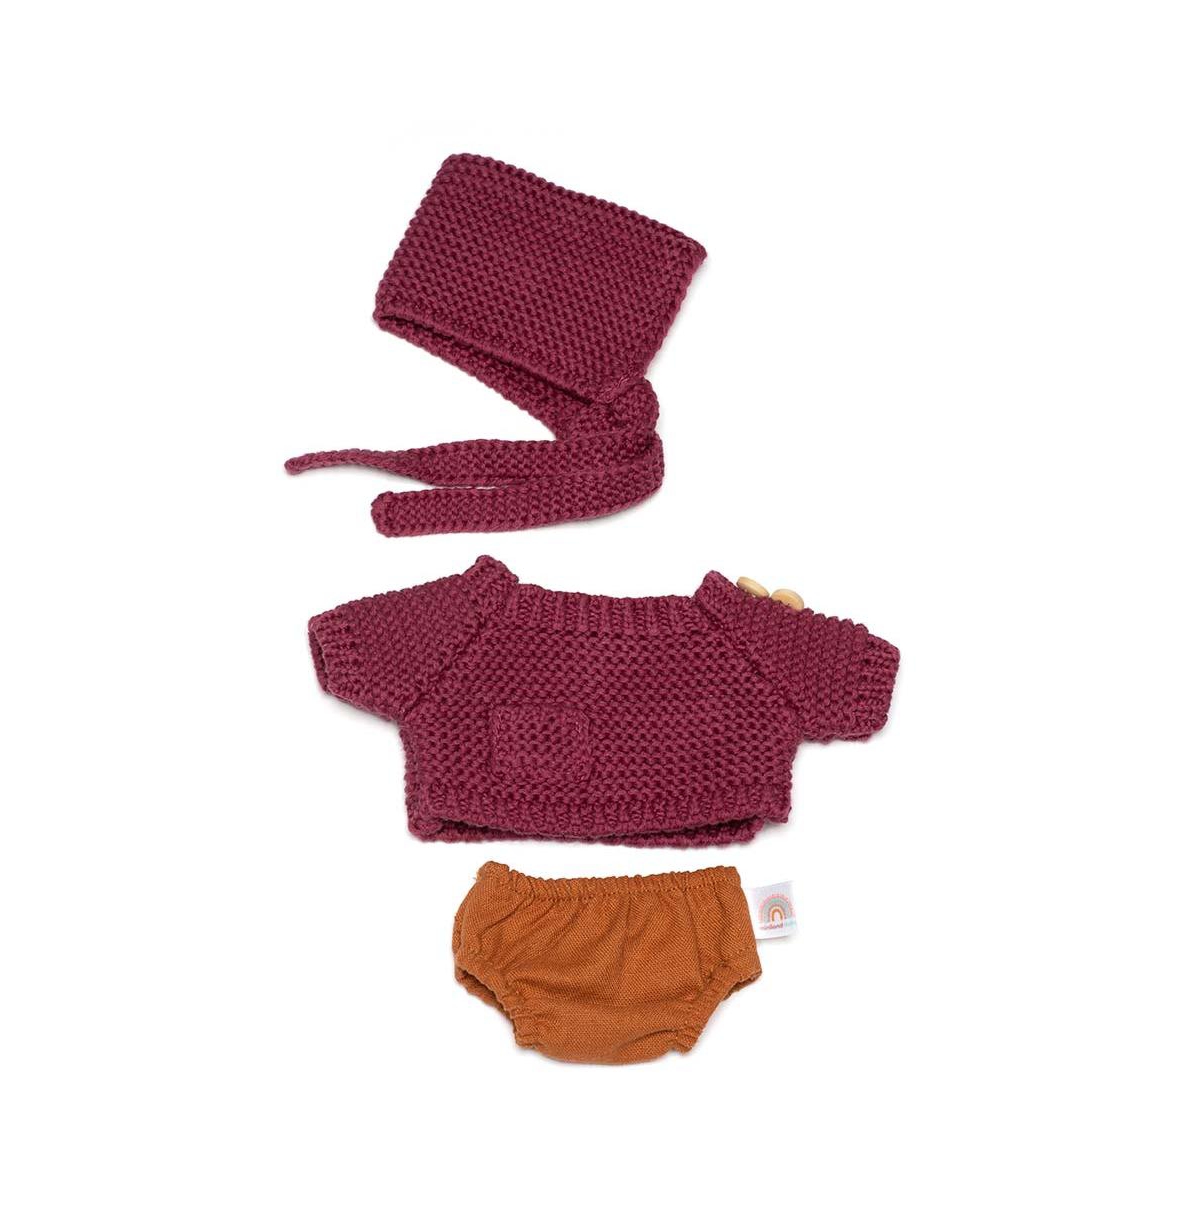 Miniland Kids' Dune 8.25" Boy Clothing Toy Set In Brown And Pink